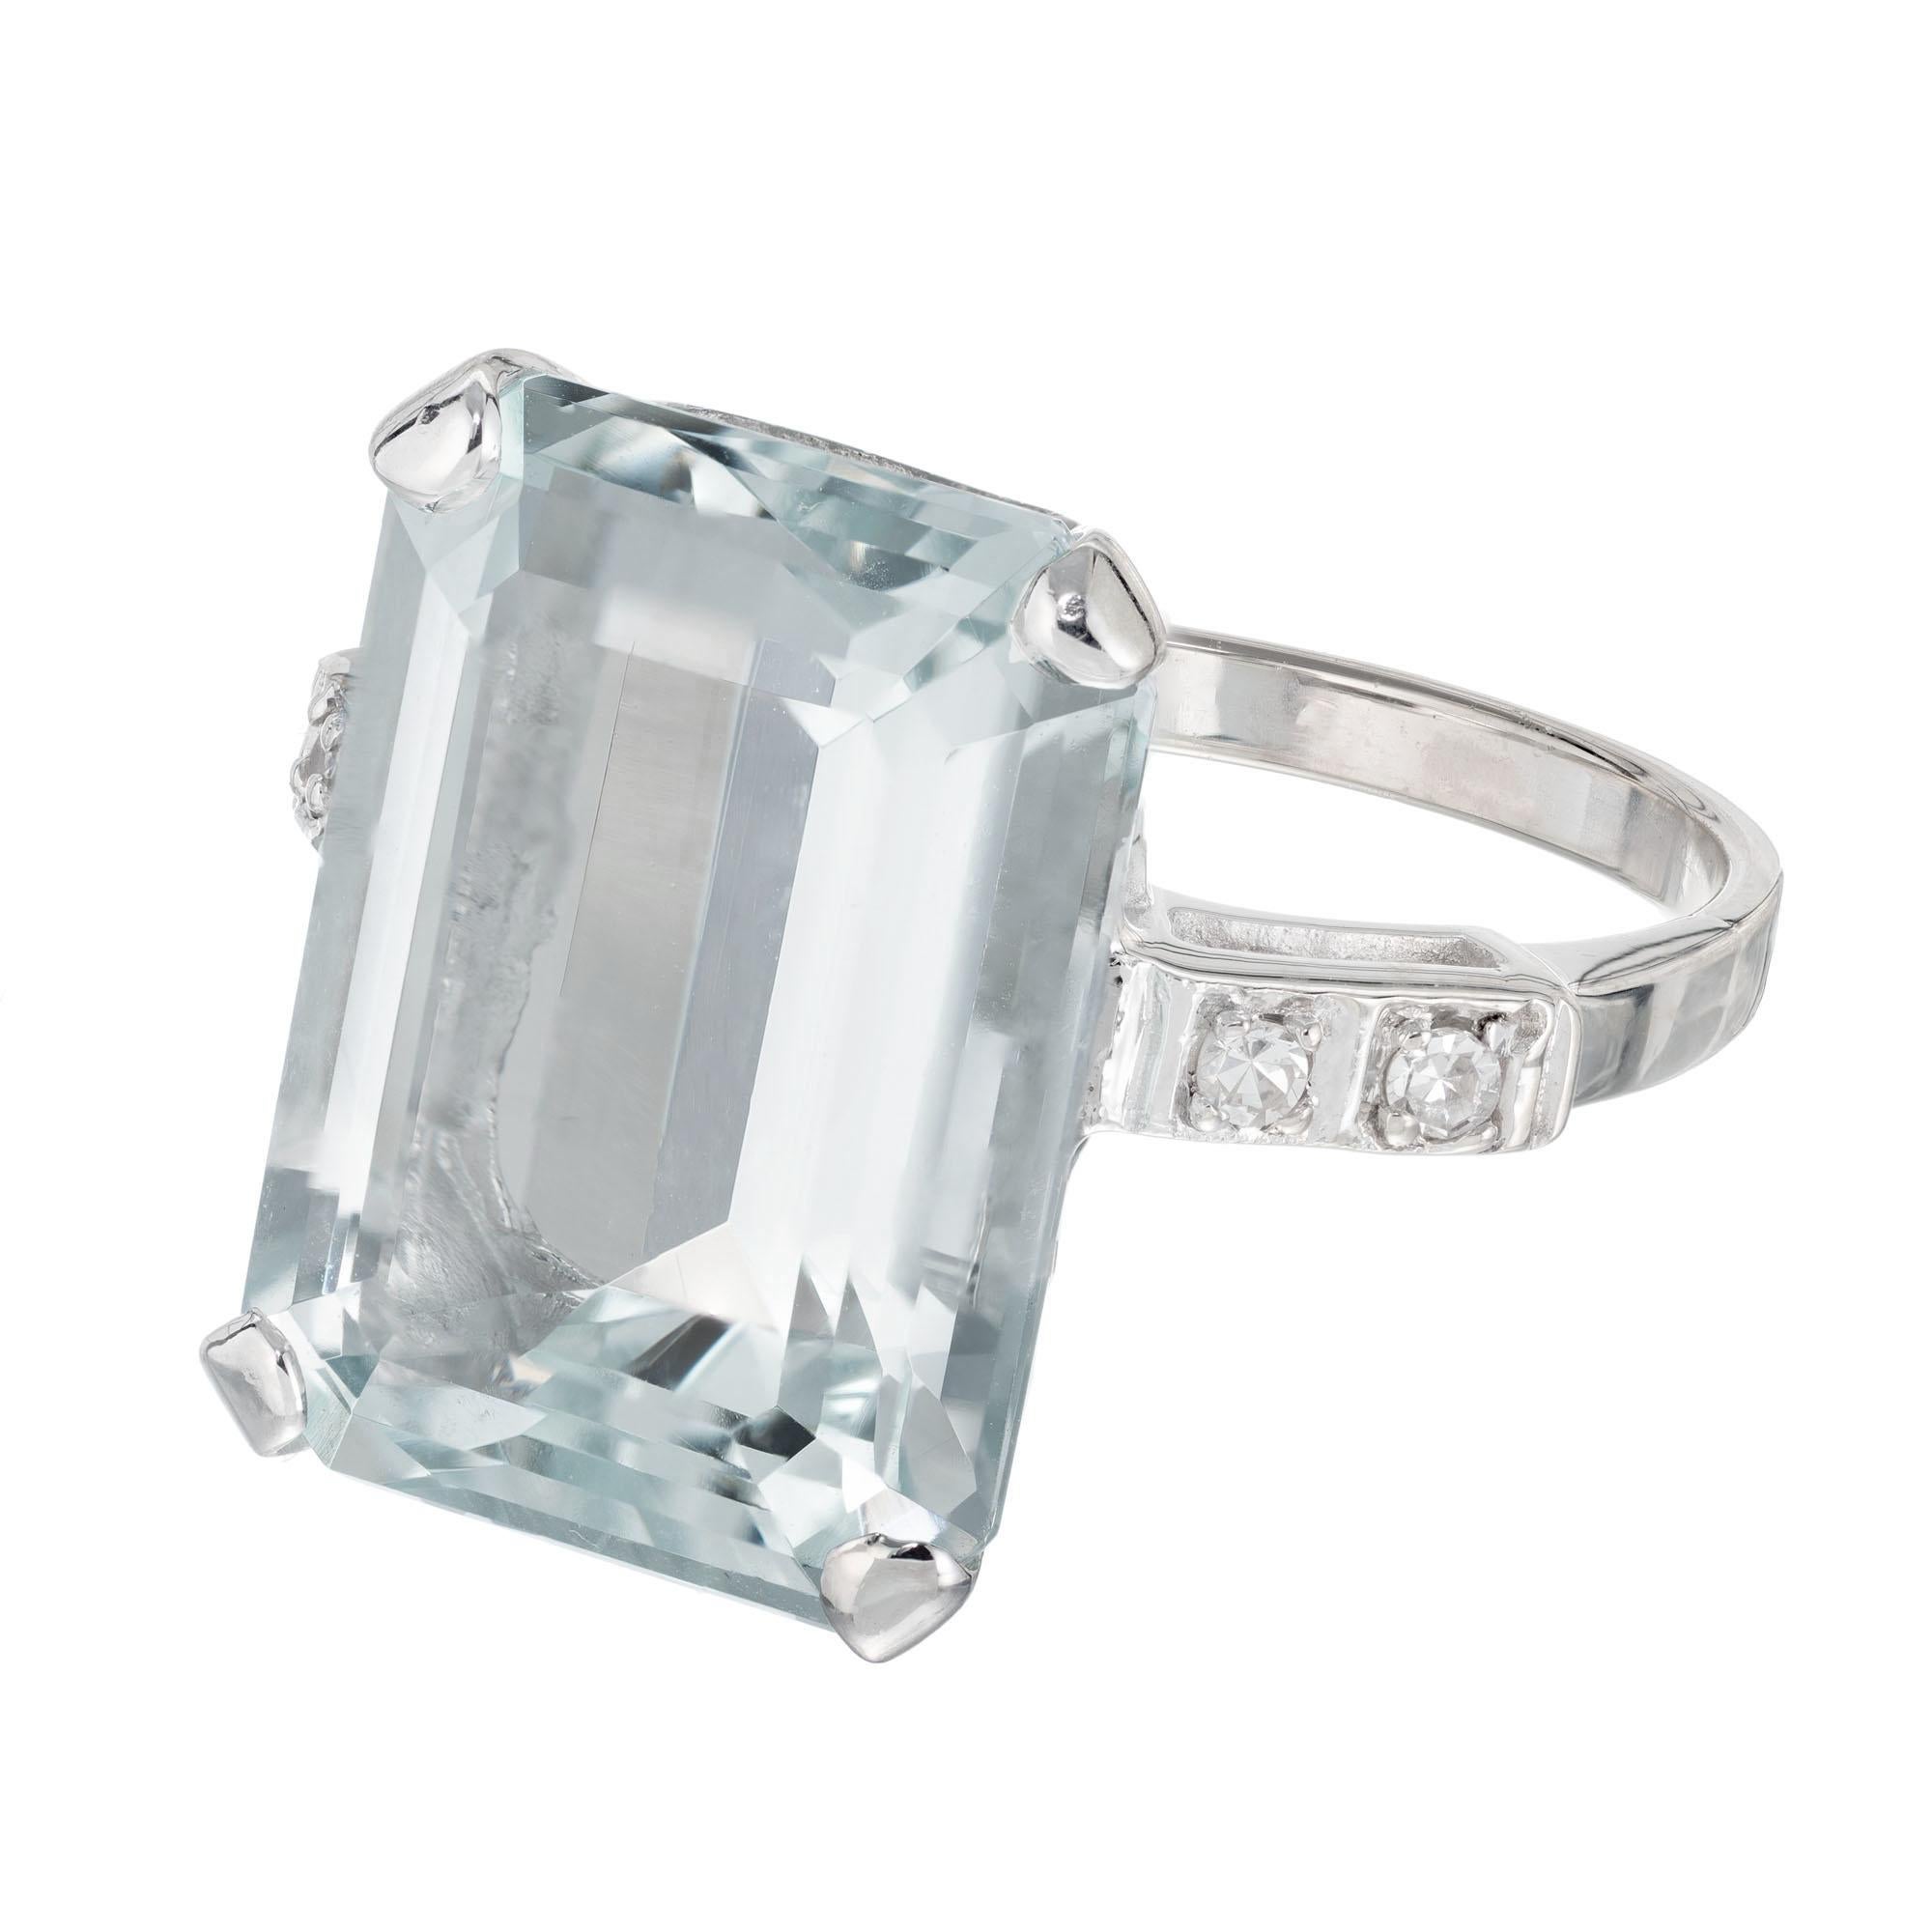 1950's Emerald cut aqua cocktail ring. 10.51 carat center stone in a 14k white gold setting with 4 single cut accent diamonds. 

1 rectangular pale blue aquamarine, approx. 10.51ct
4 round single cut diamond, G-H VS approx..6cts
Size 6.5 and sizable